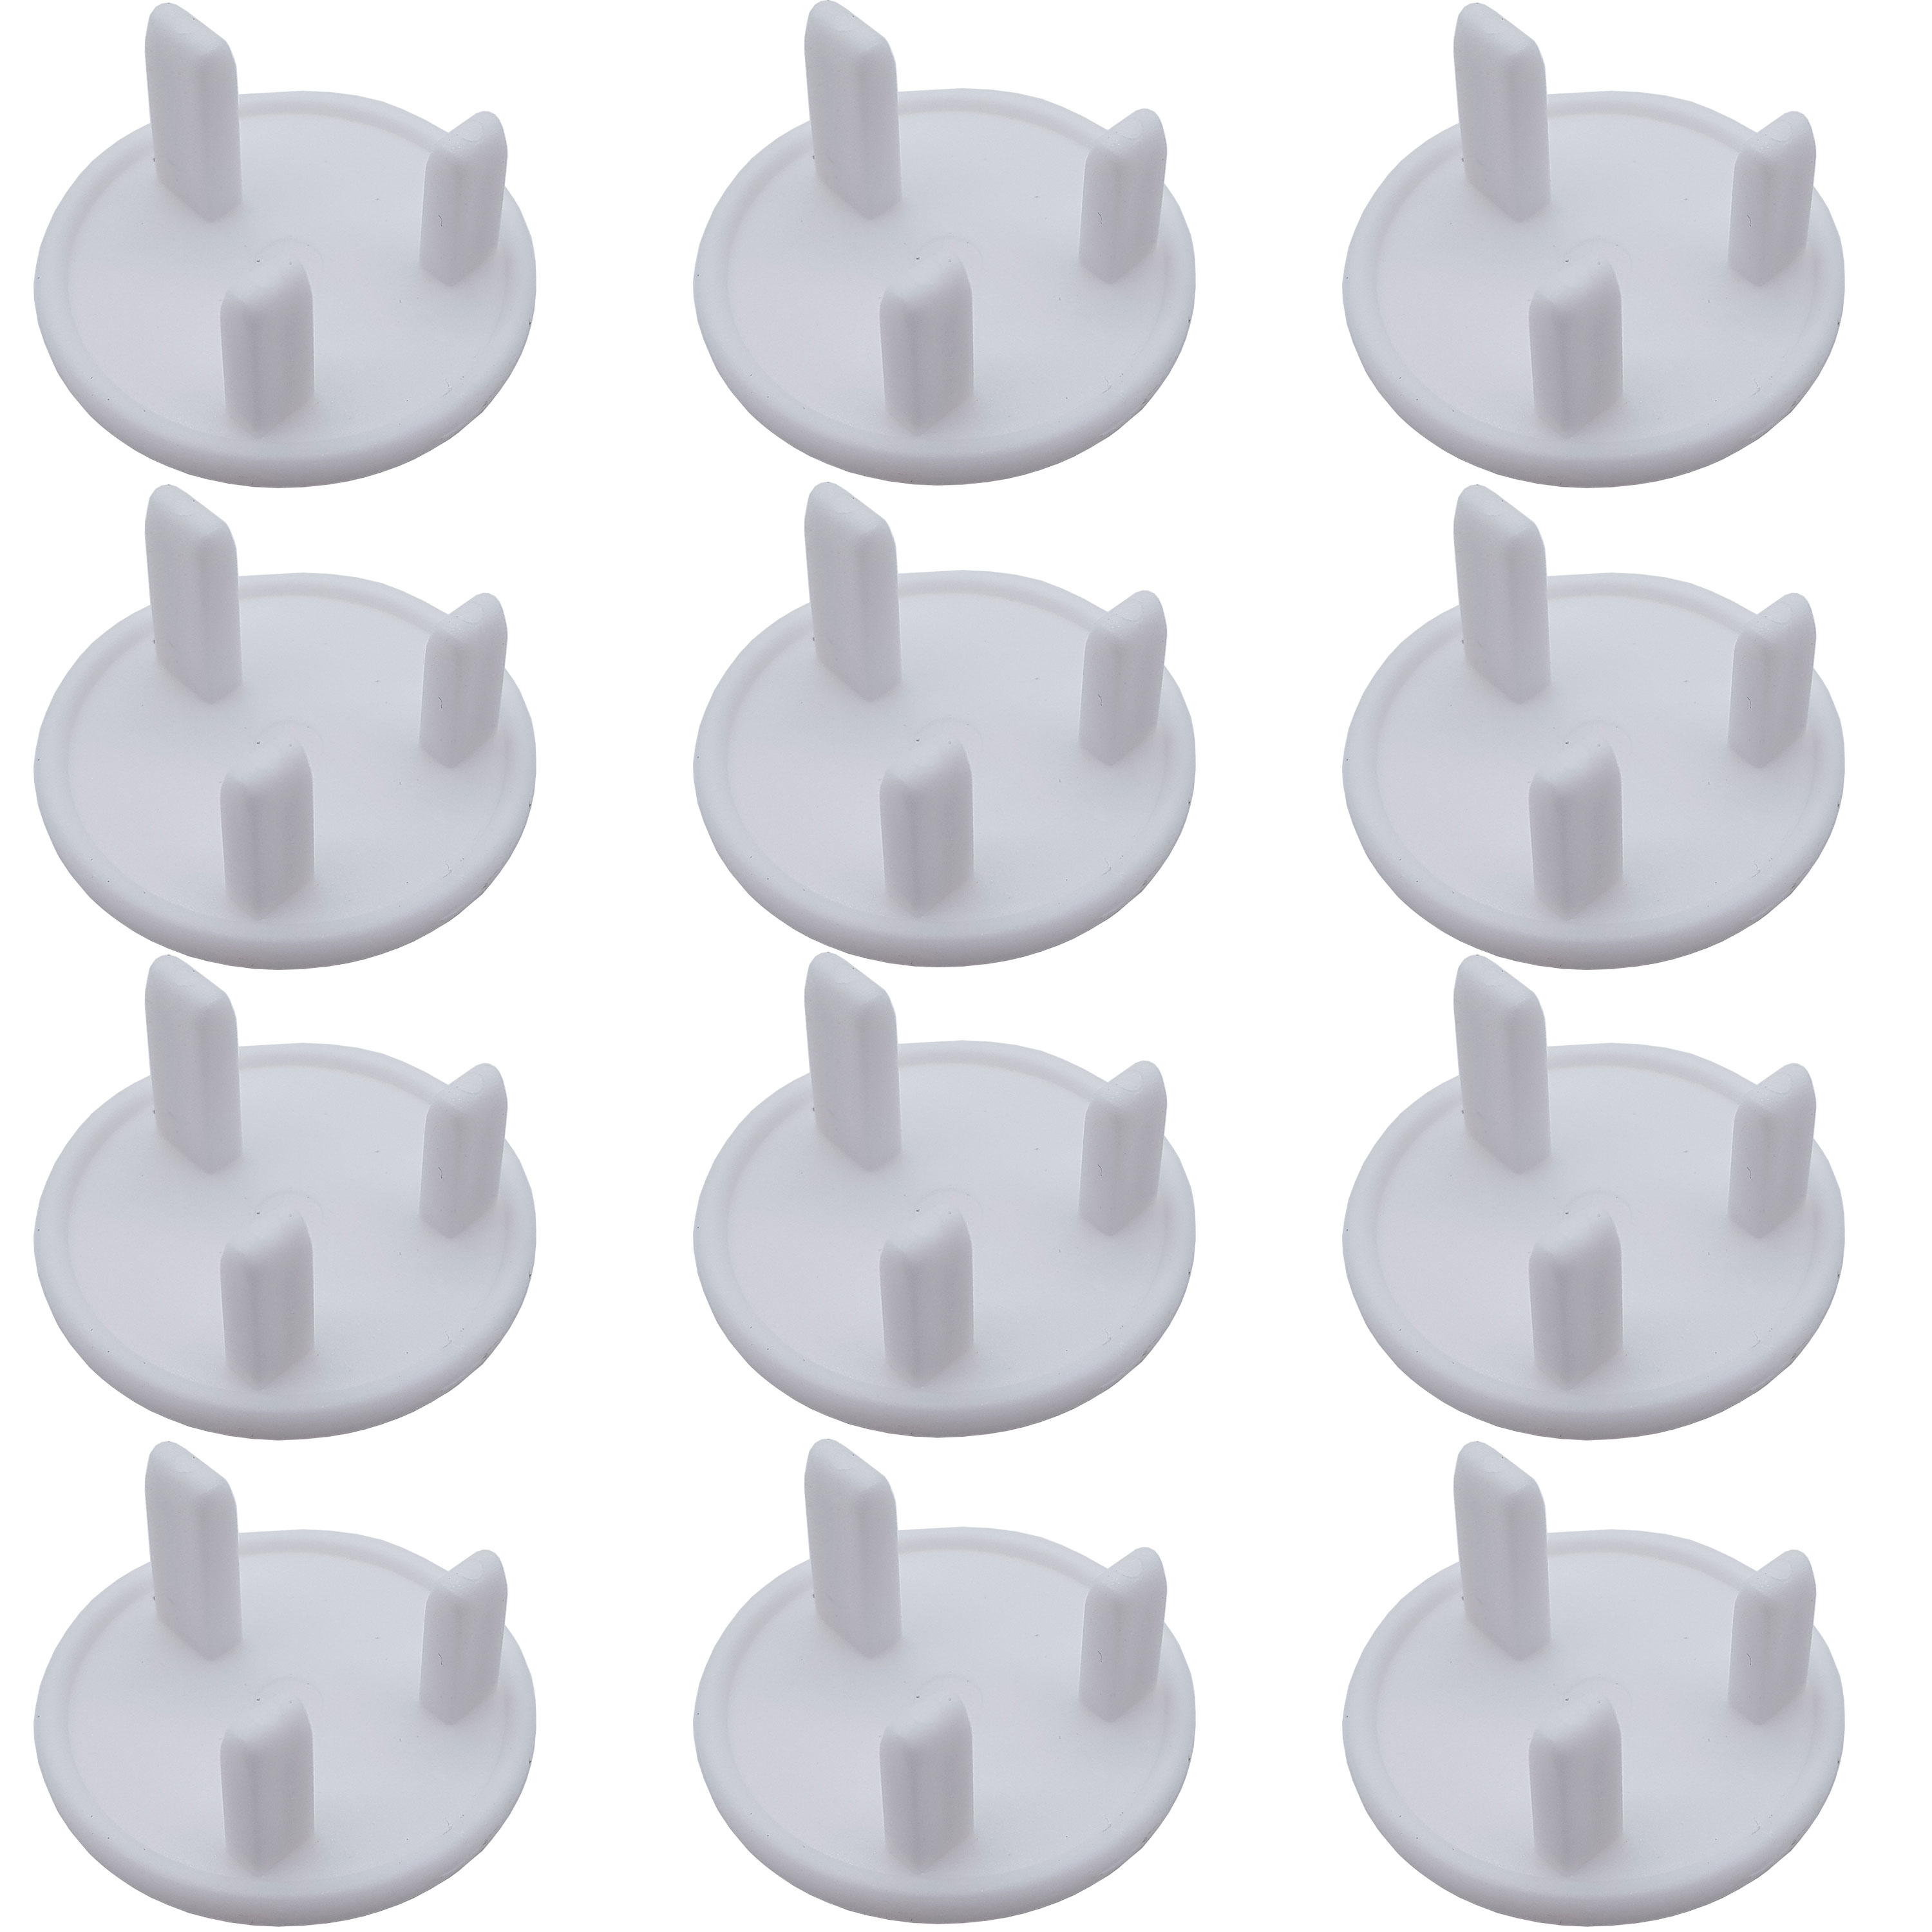 Child Proof Saftey Plug Wall Socket Cover Protector 5 pack